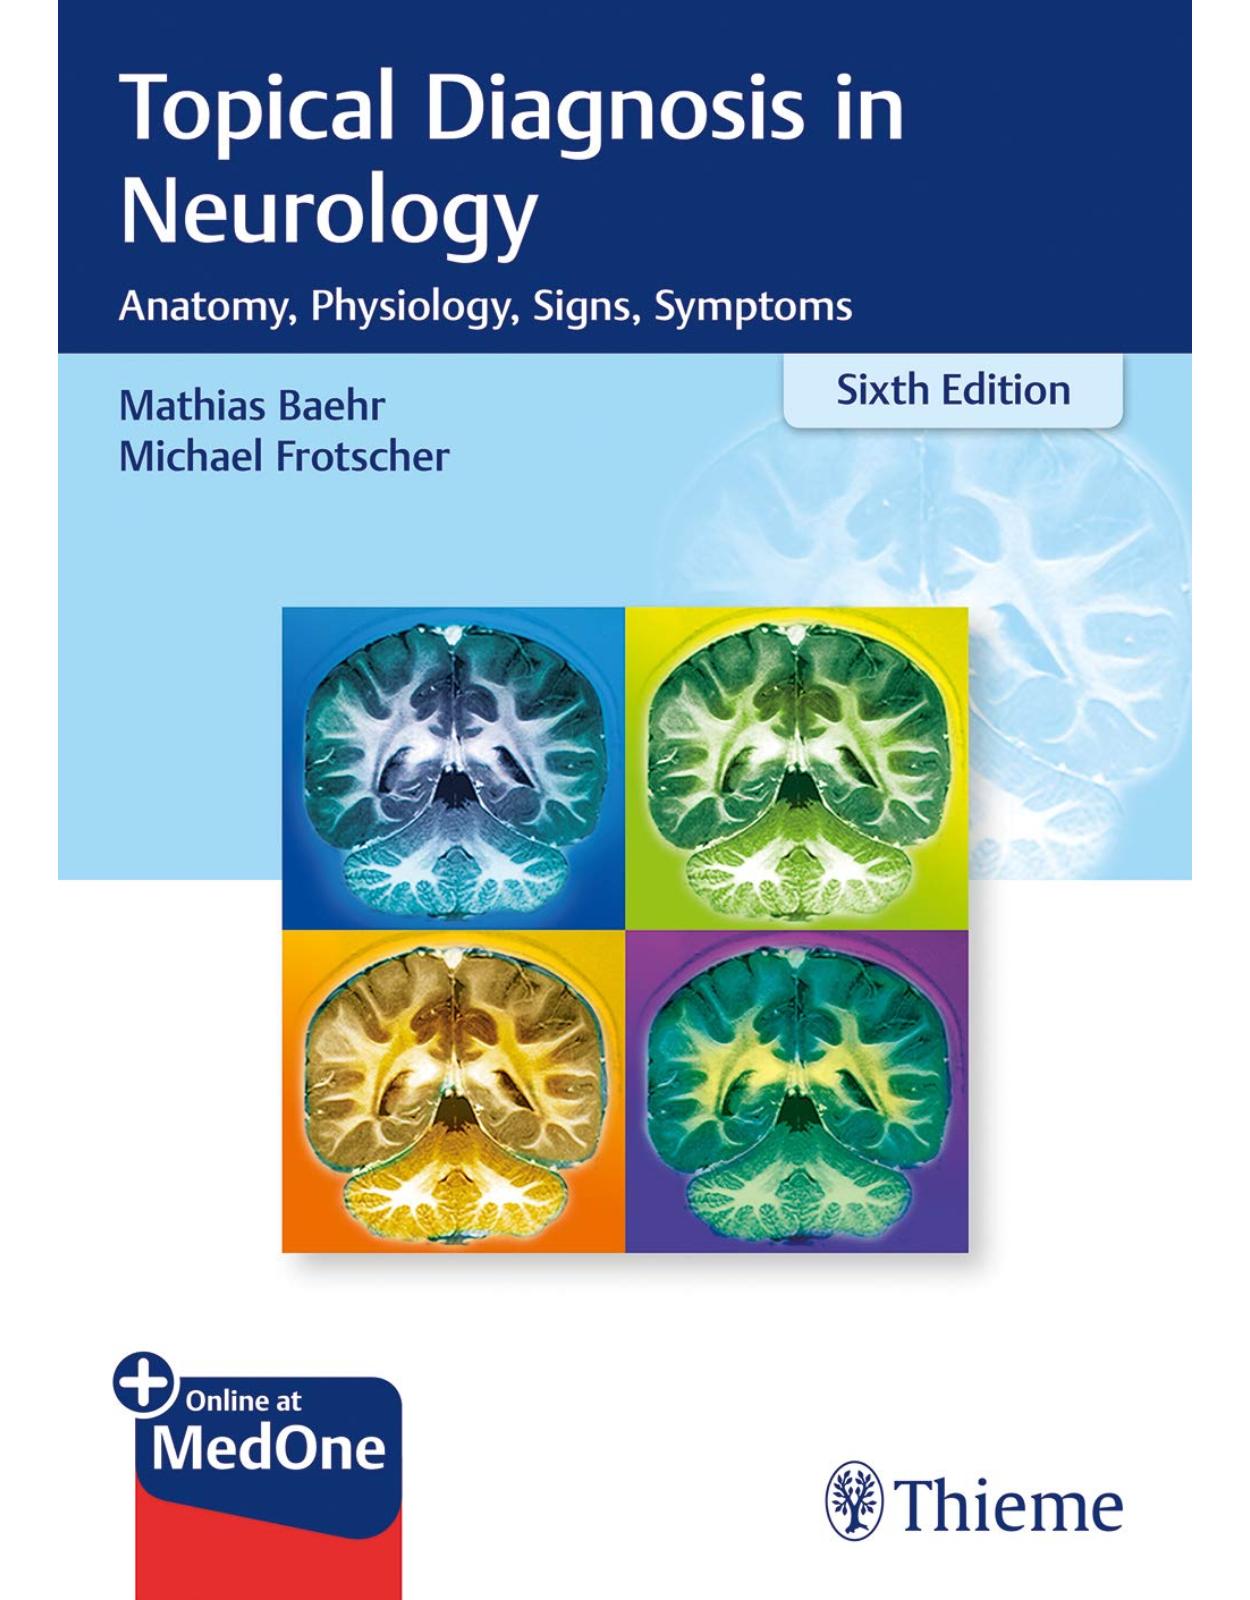 Topical Diagnosis in Neurology: Anatomy, Physiology, Signs, Symptoms 